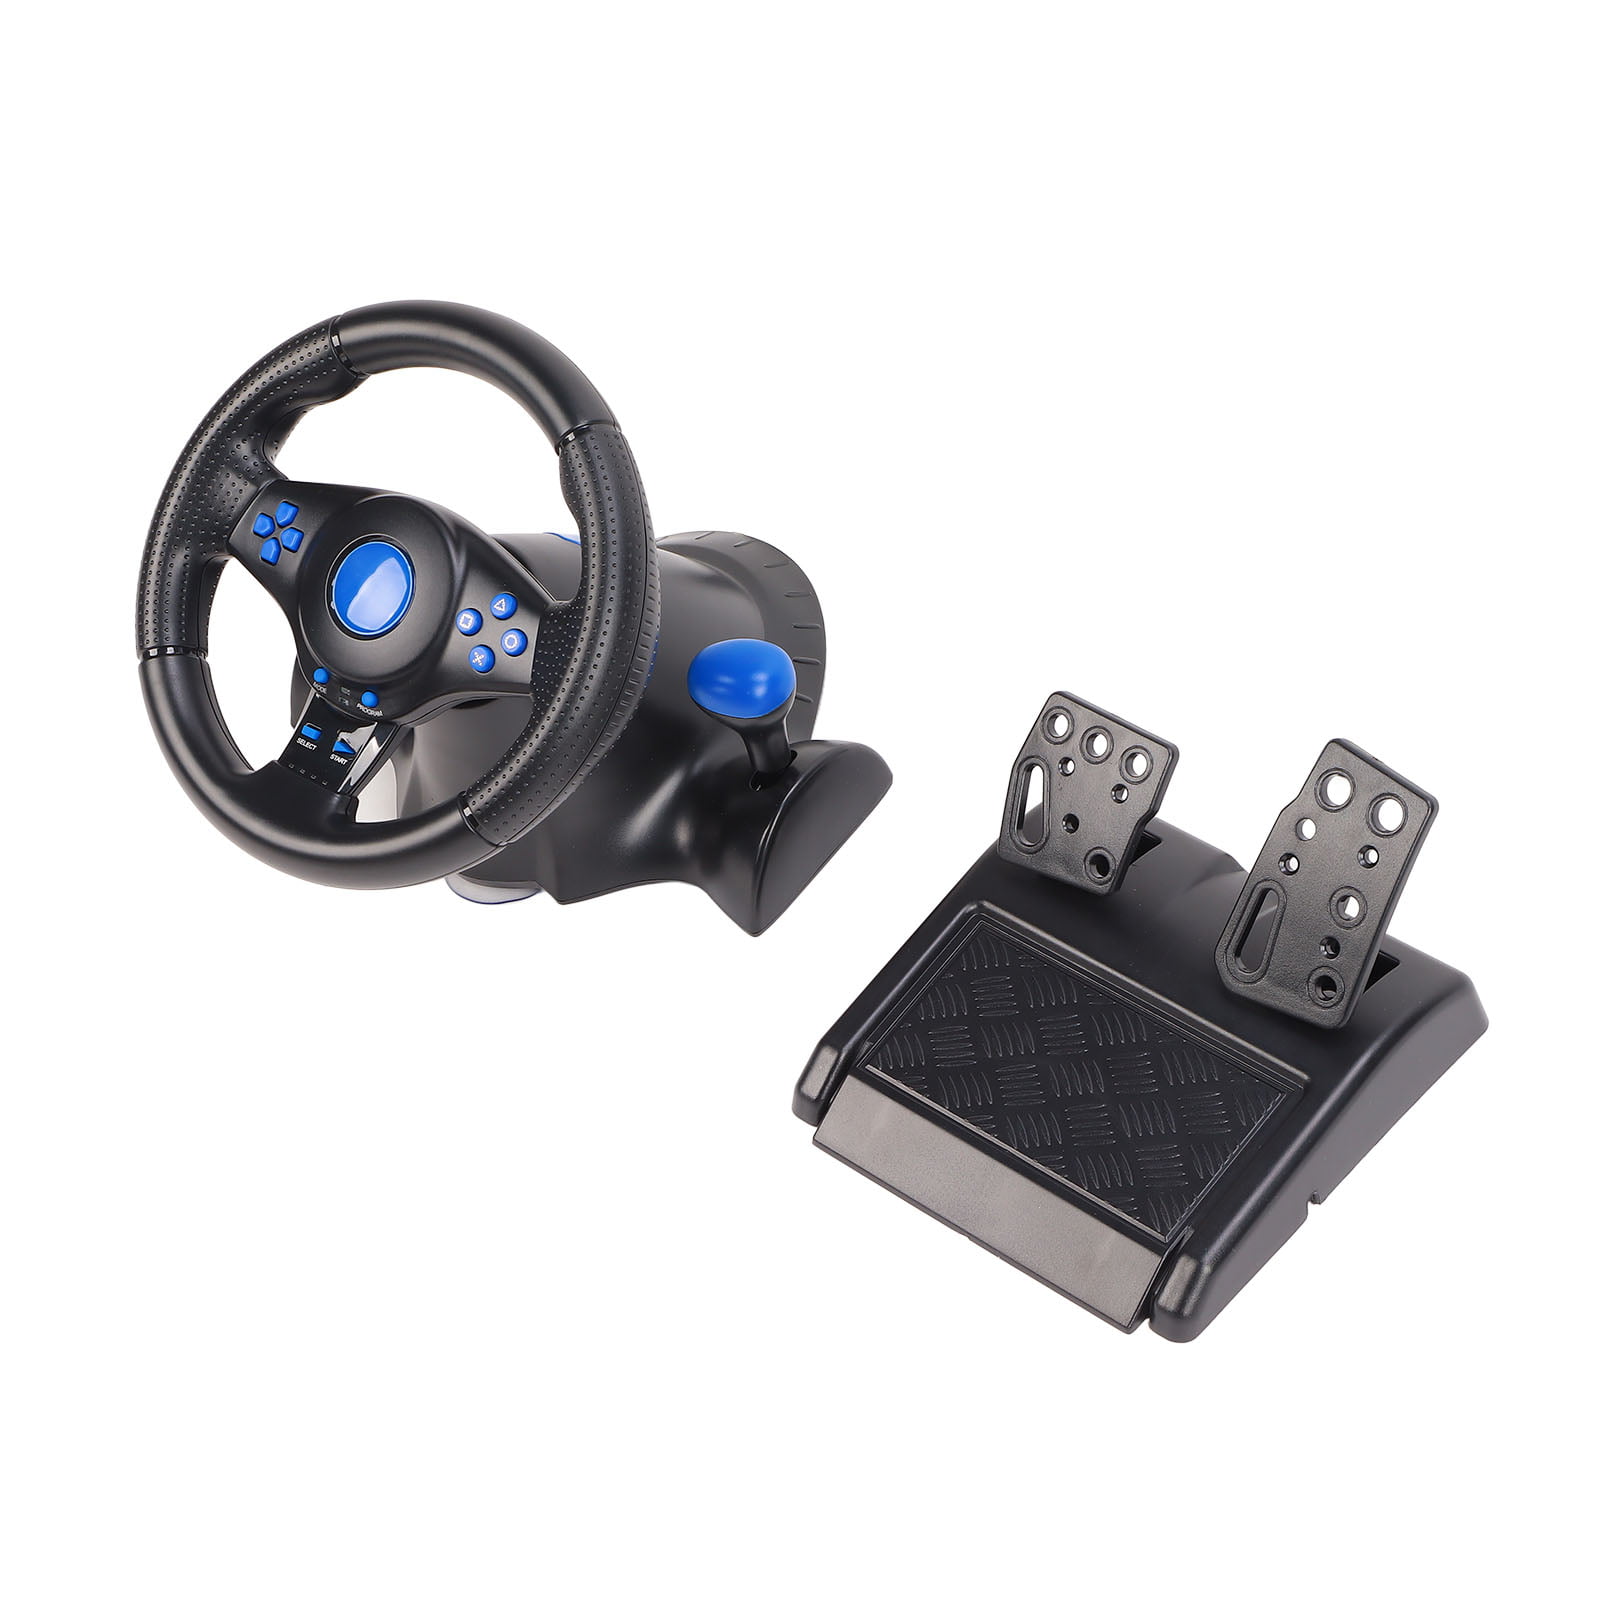 WILD THINGS TURBO RACE Racing STEERING Wheel with Pedals for PLAYSTATION